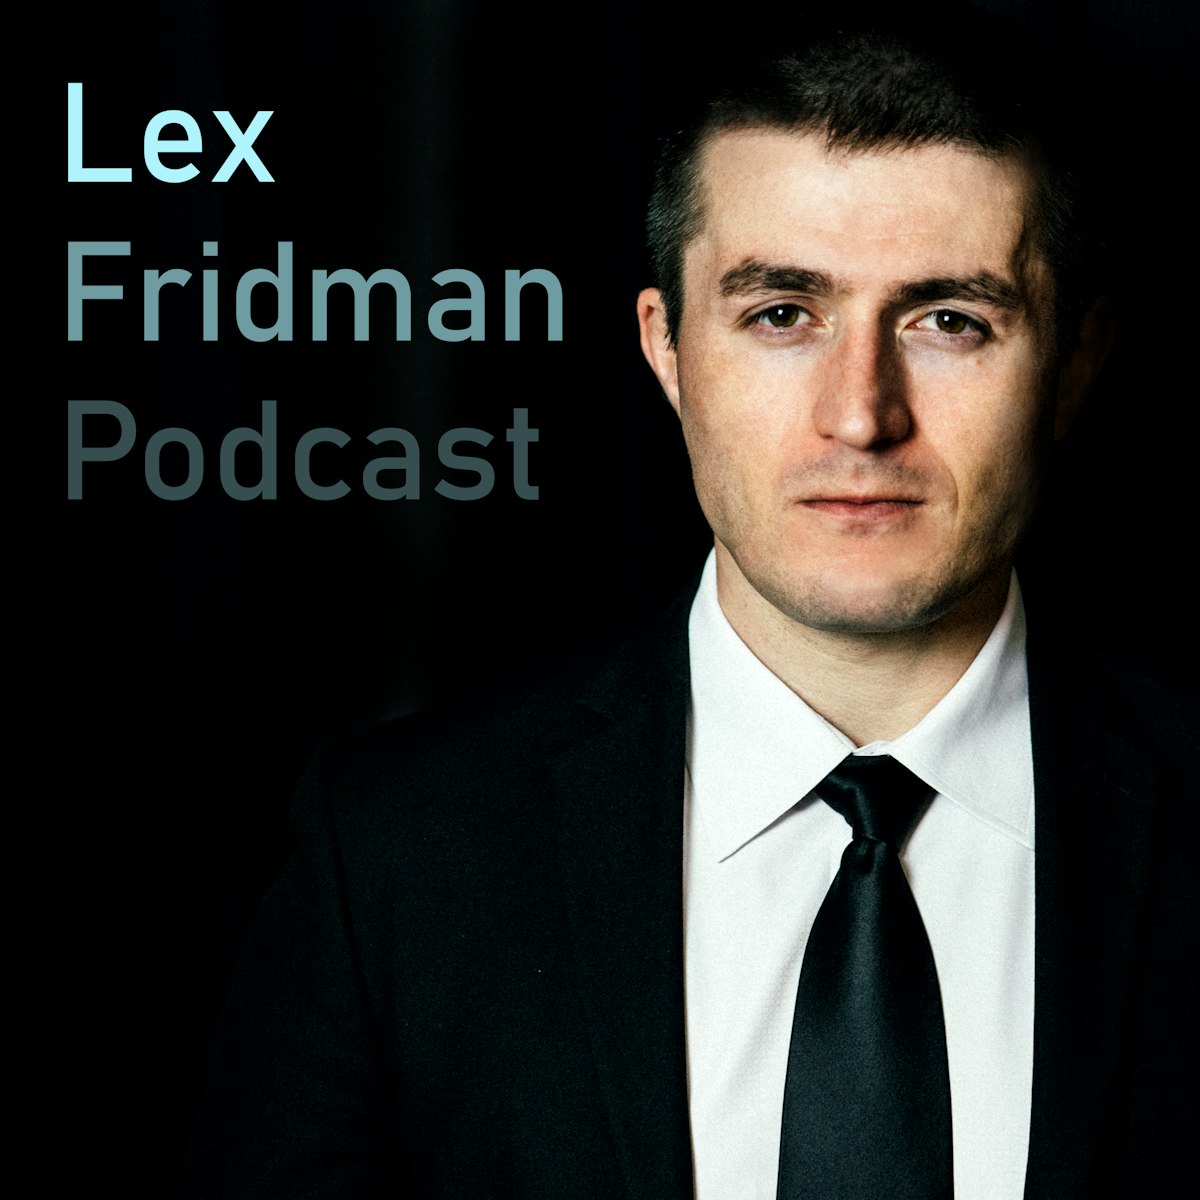 Lex Fridman - Had a great training session with Elon Musk, Georges